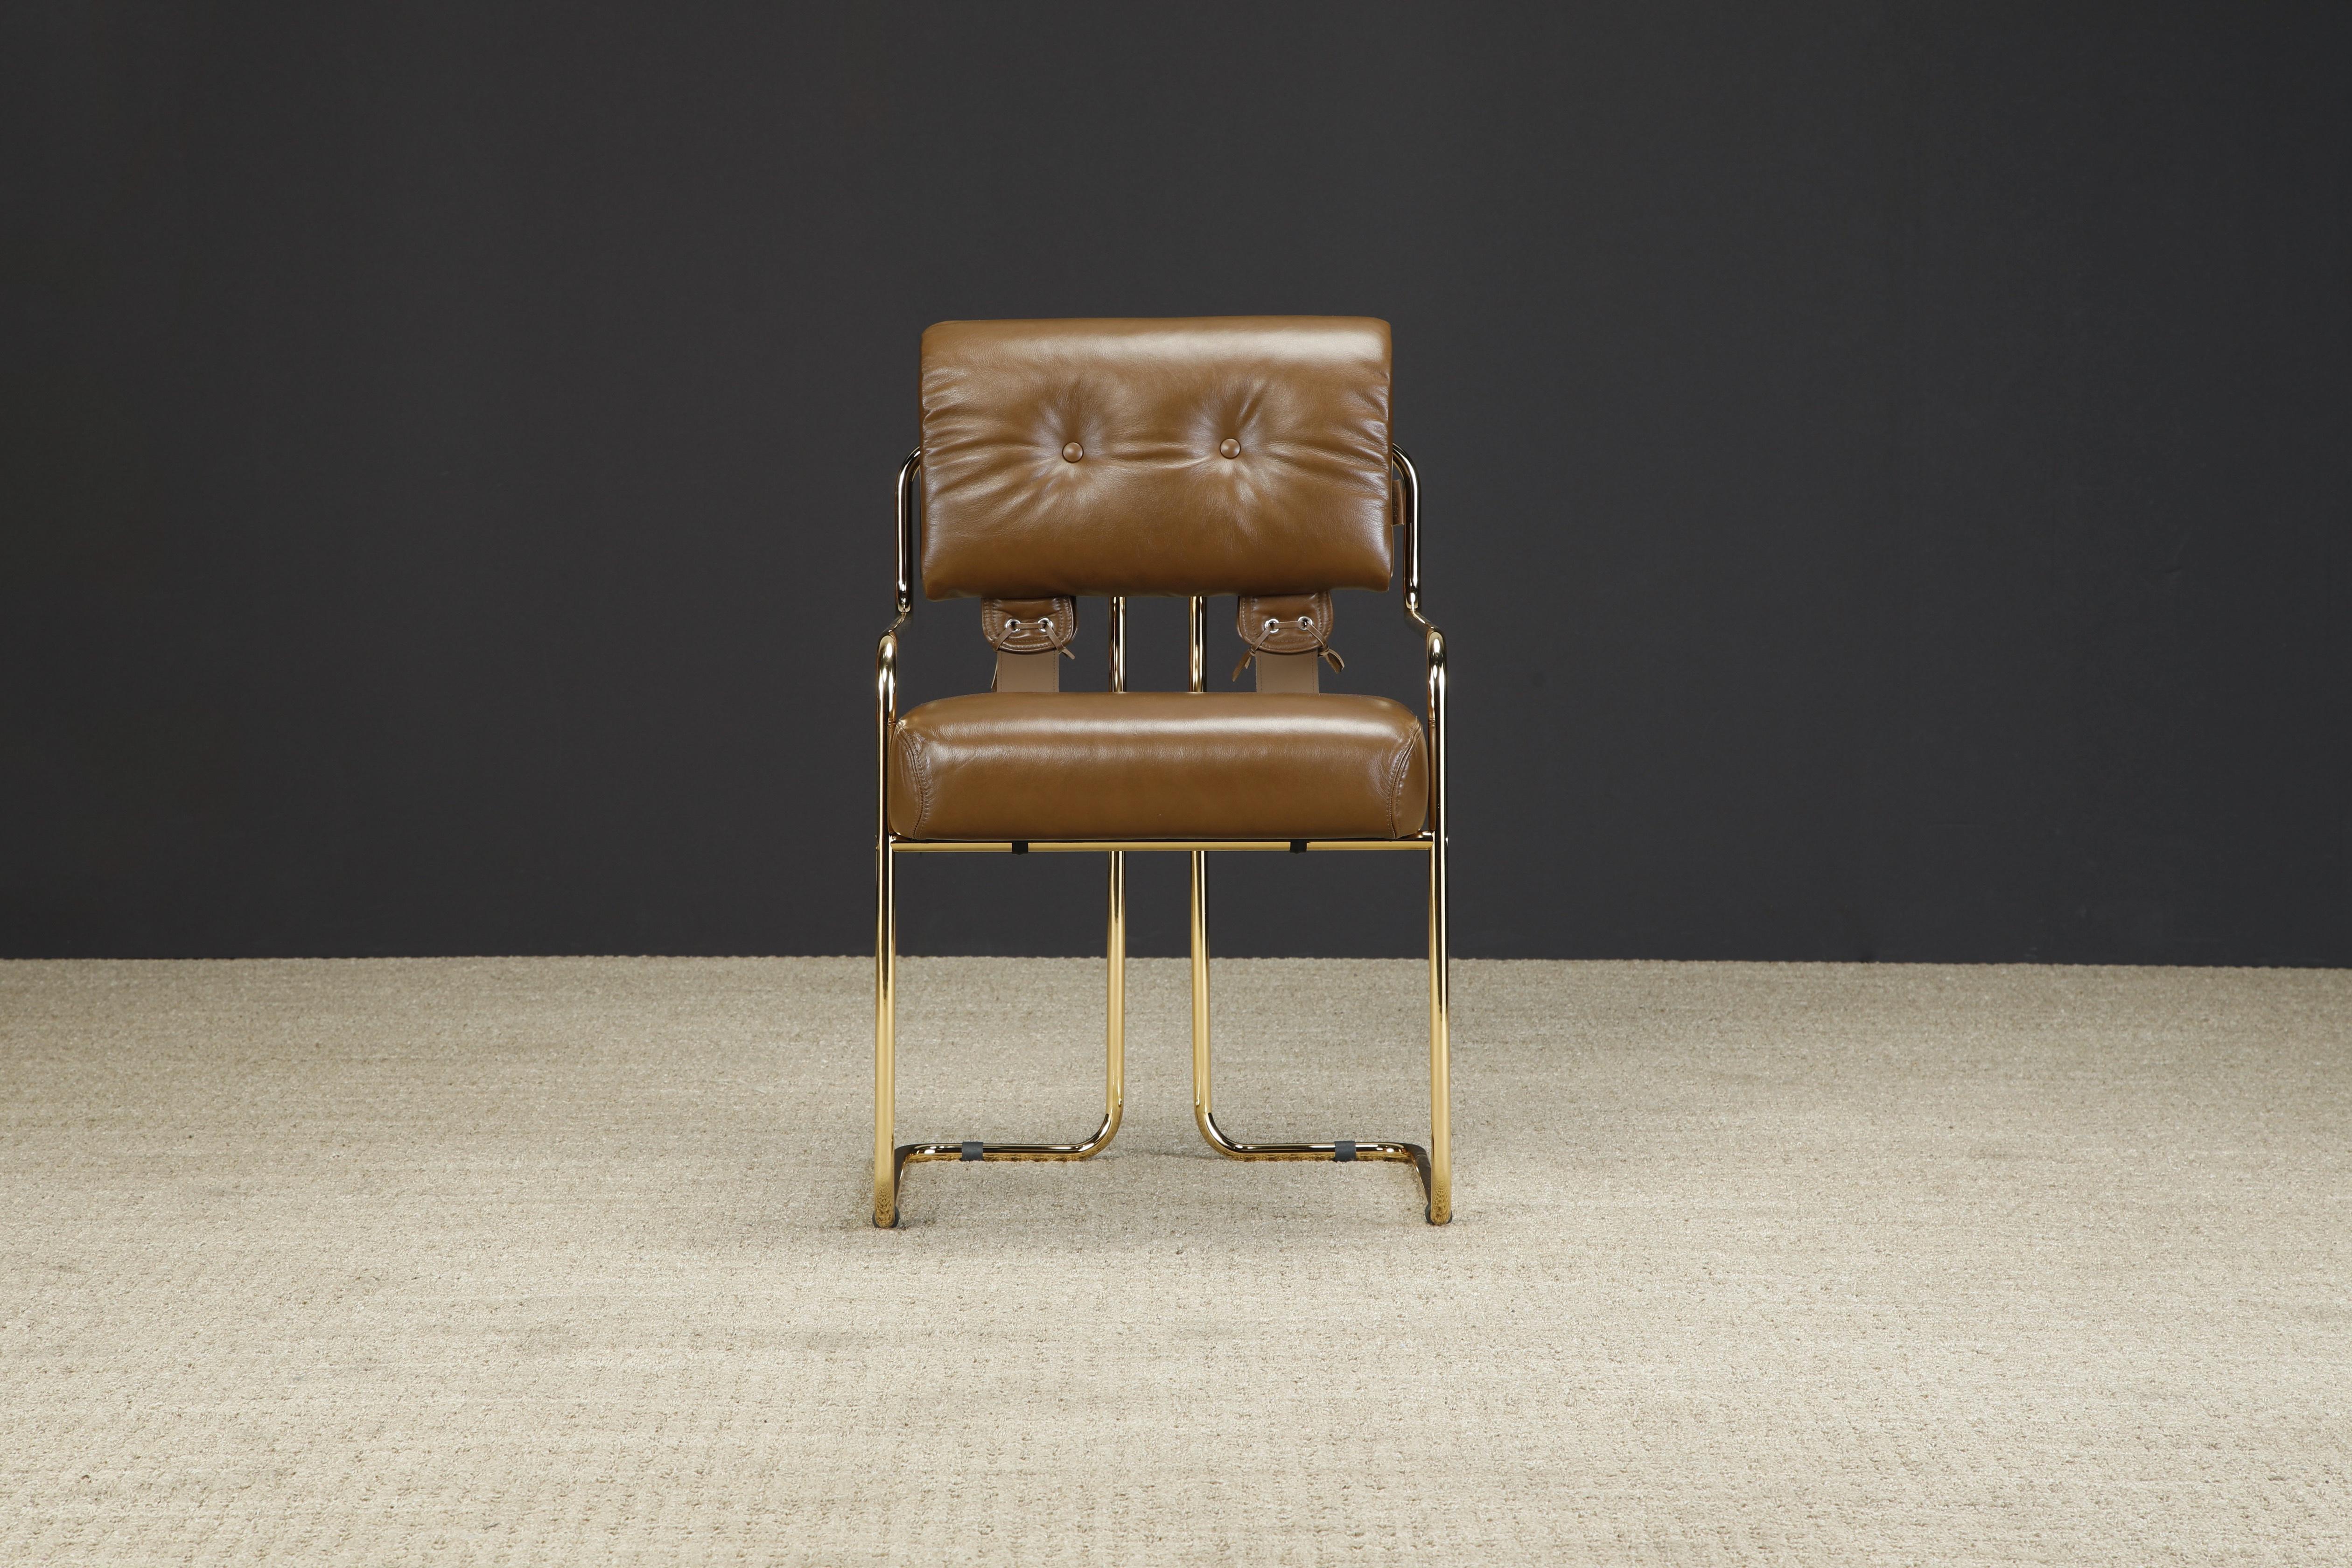 Currently, the most coveted dining chairs by interior designers are 'Tucroma' chairs by Guido Faleschini for i4 Mariani, and we have this incredible special edition Tucroma armchair in smooth brown leather with polished gold finish frames completed